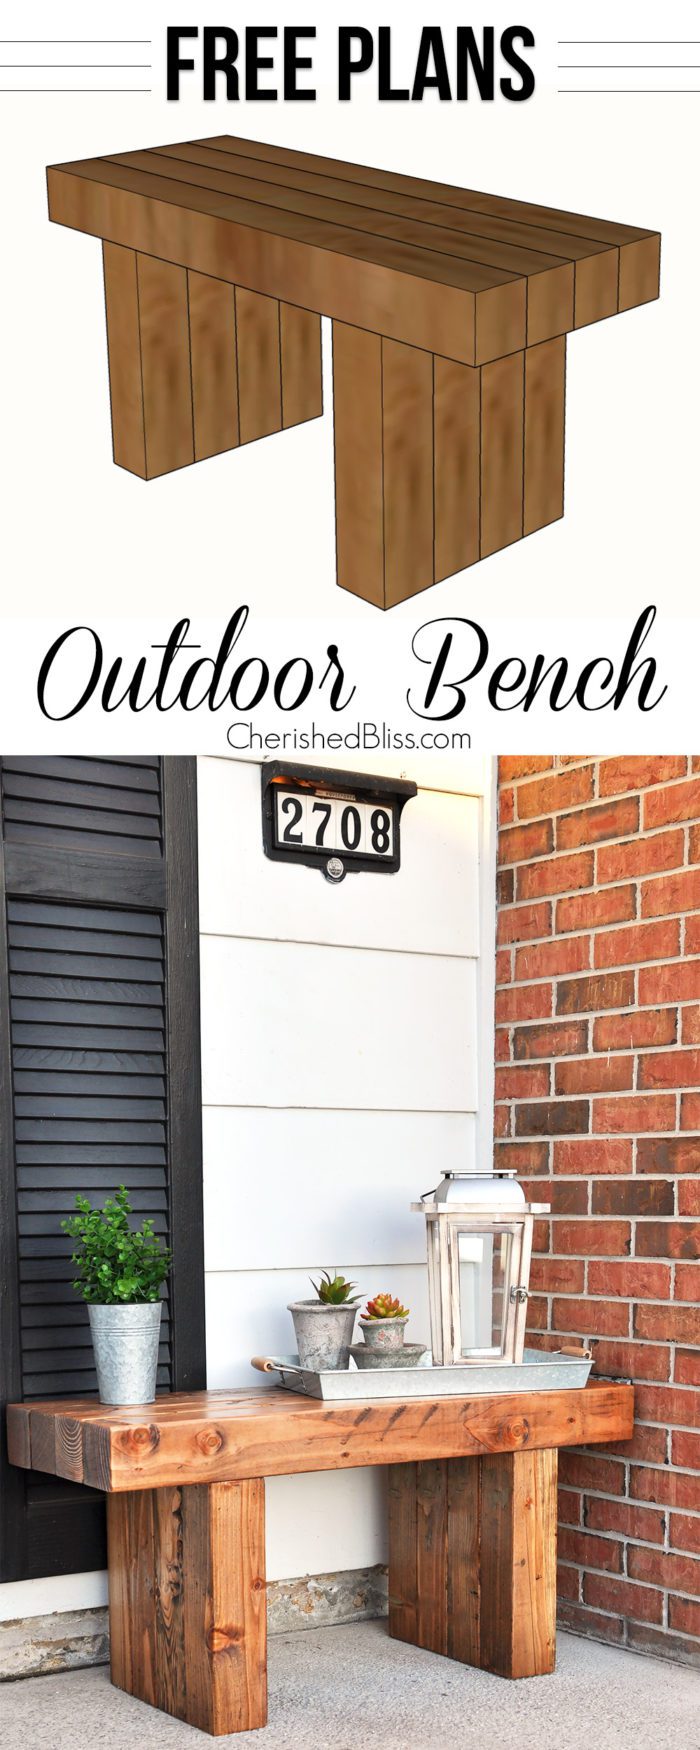 Get the FREE PLANS to build this Classic DIY Outdoor Bench! 